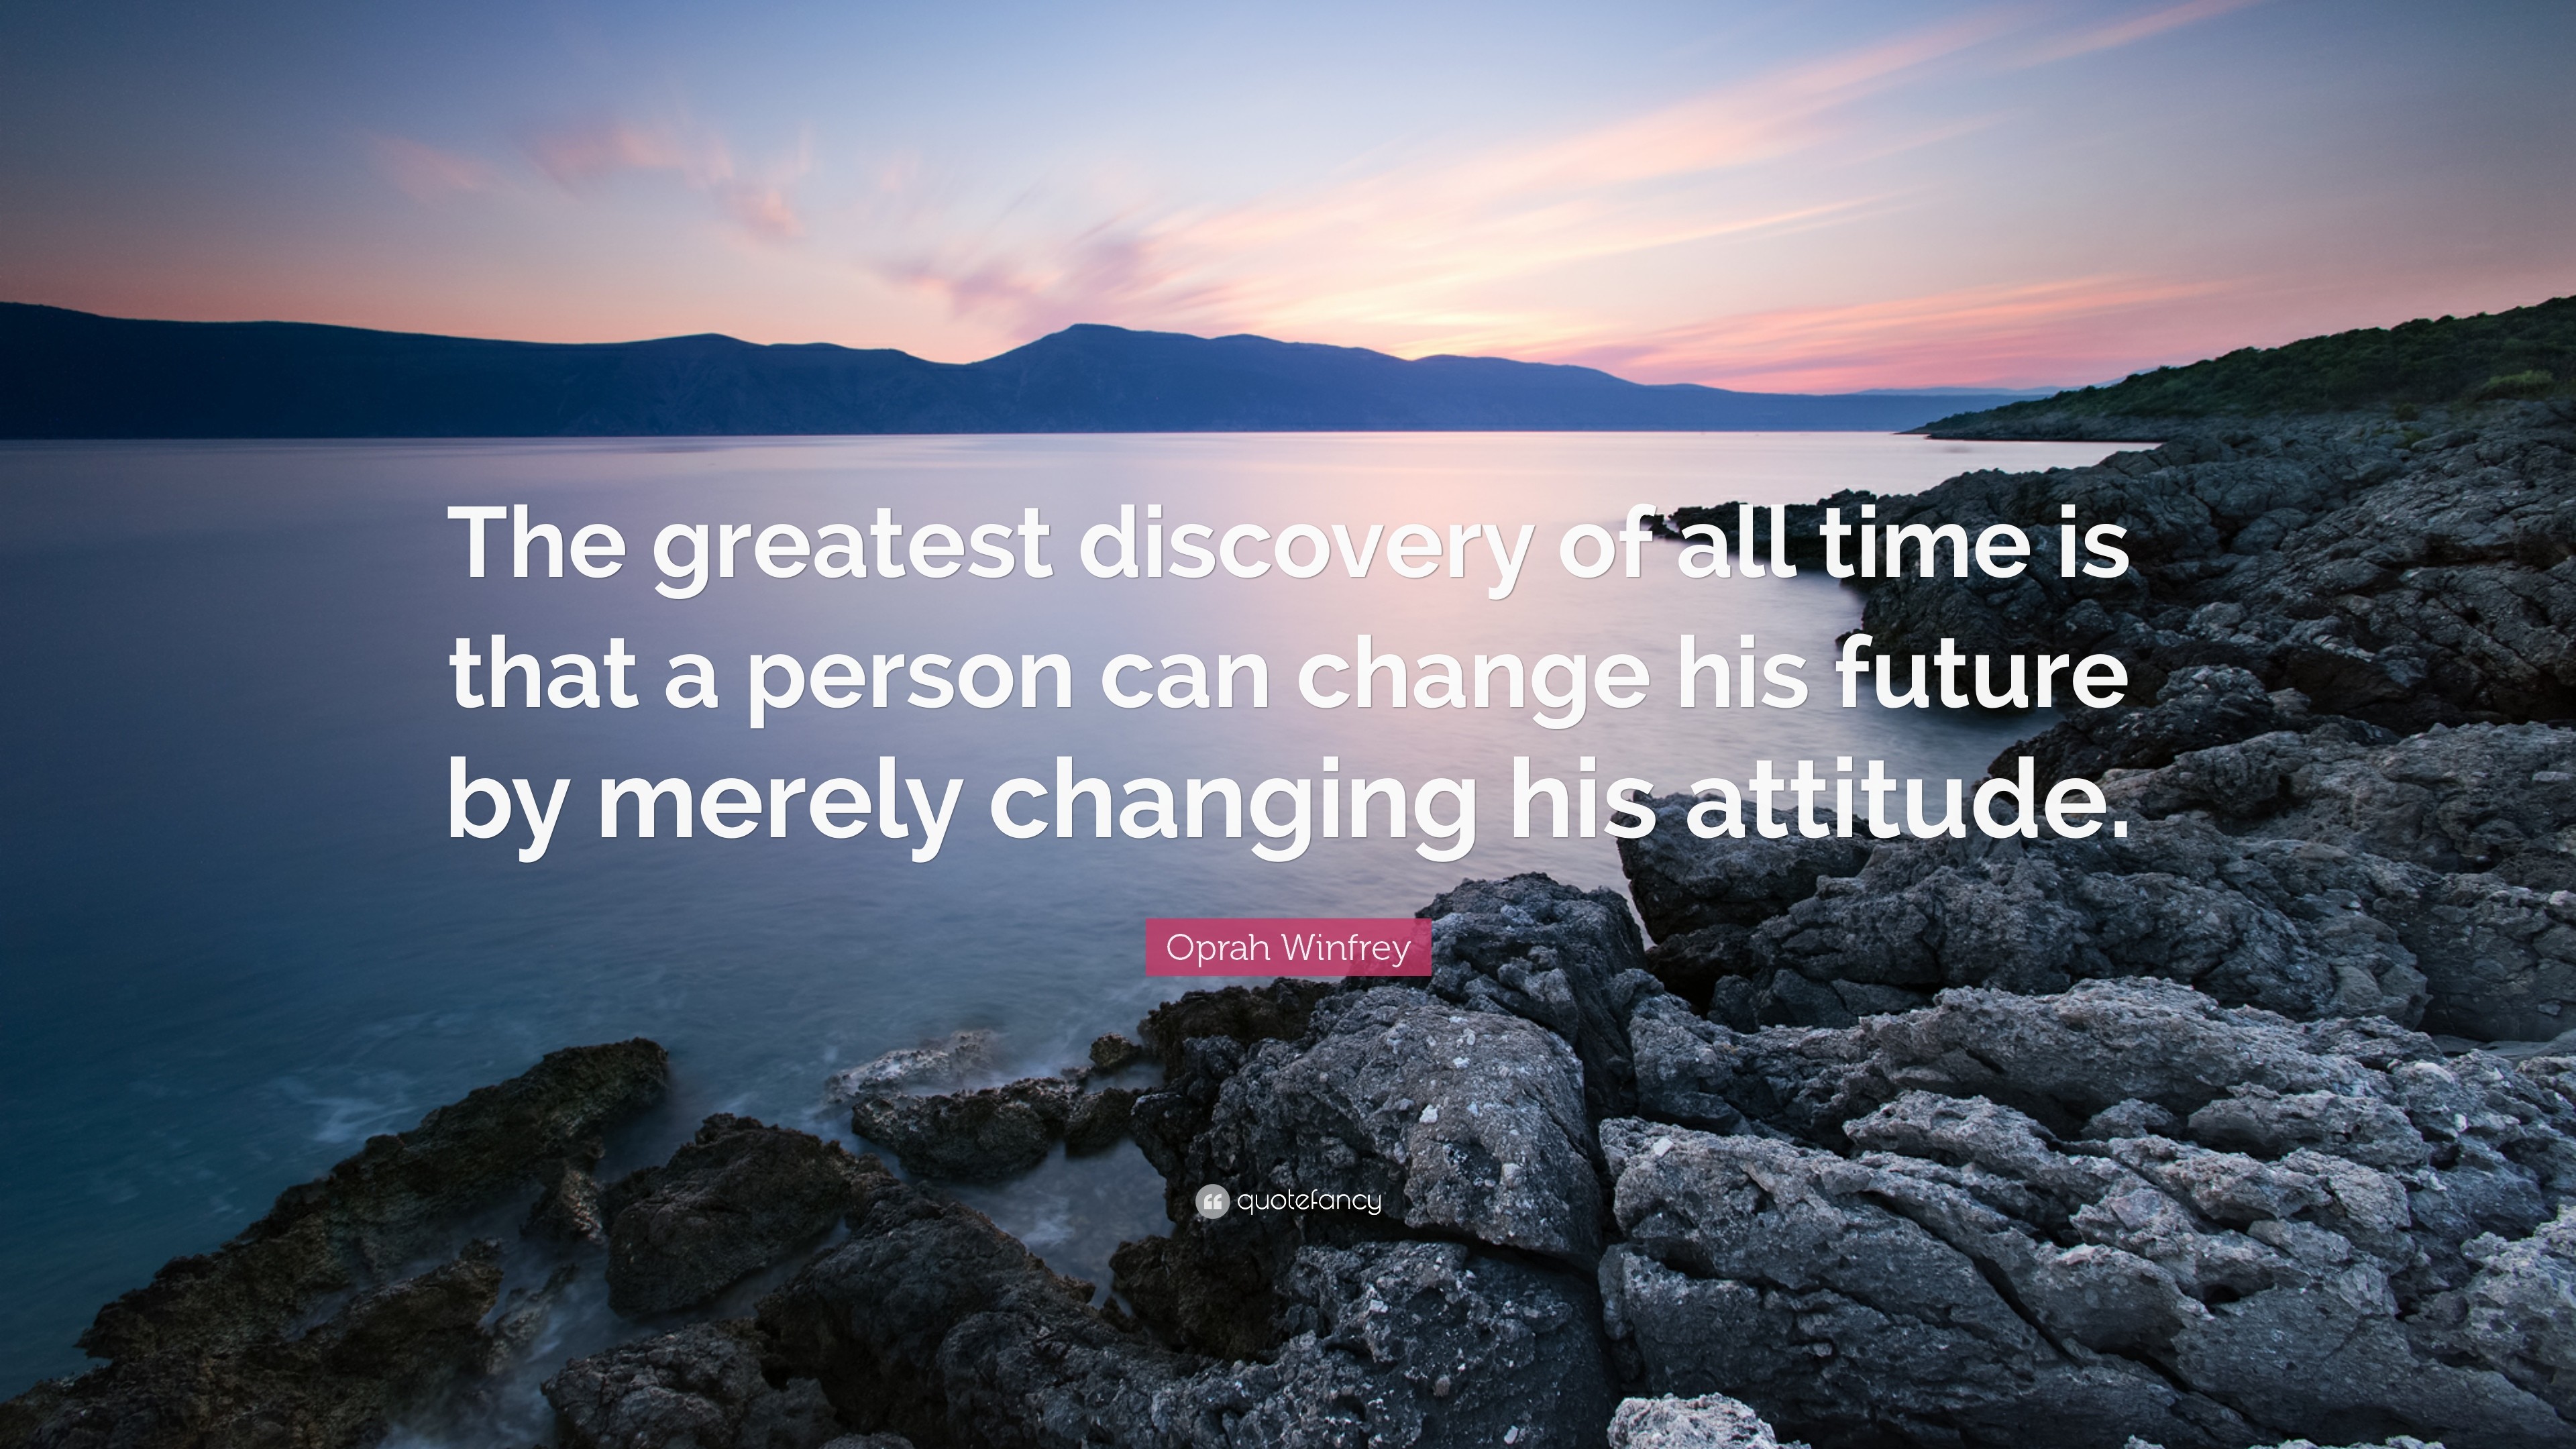 3840x2160 Happiness Quotes: “The greatest discovery of all time is that a person can  change